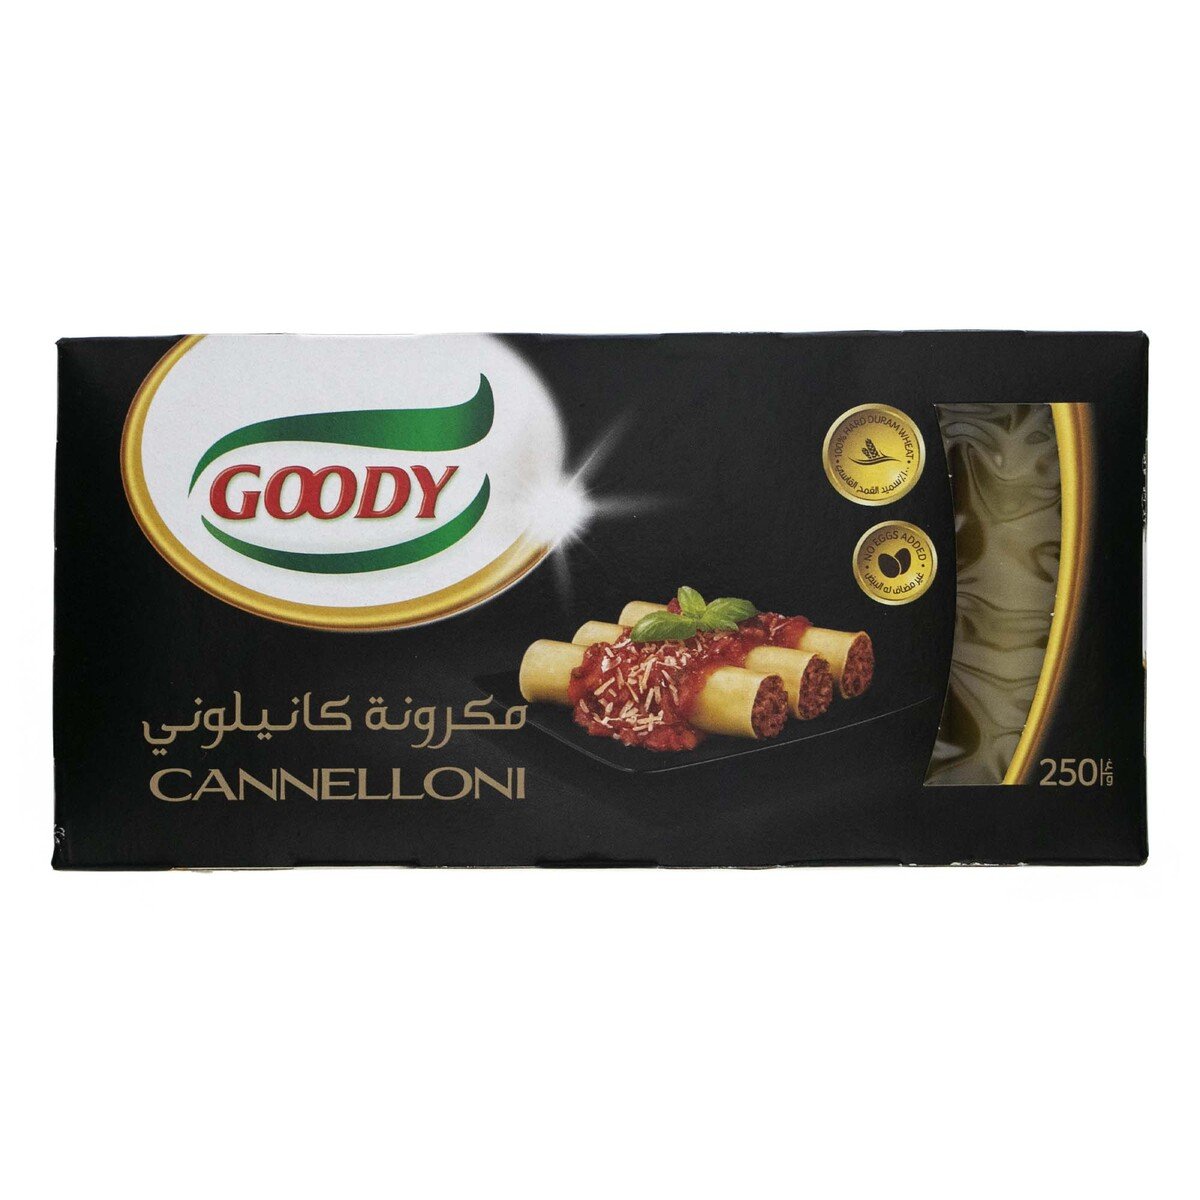 Goody Cannelloni Pasta 250 g